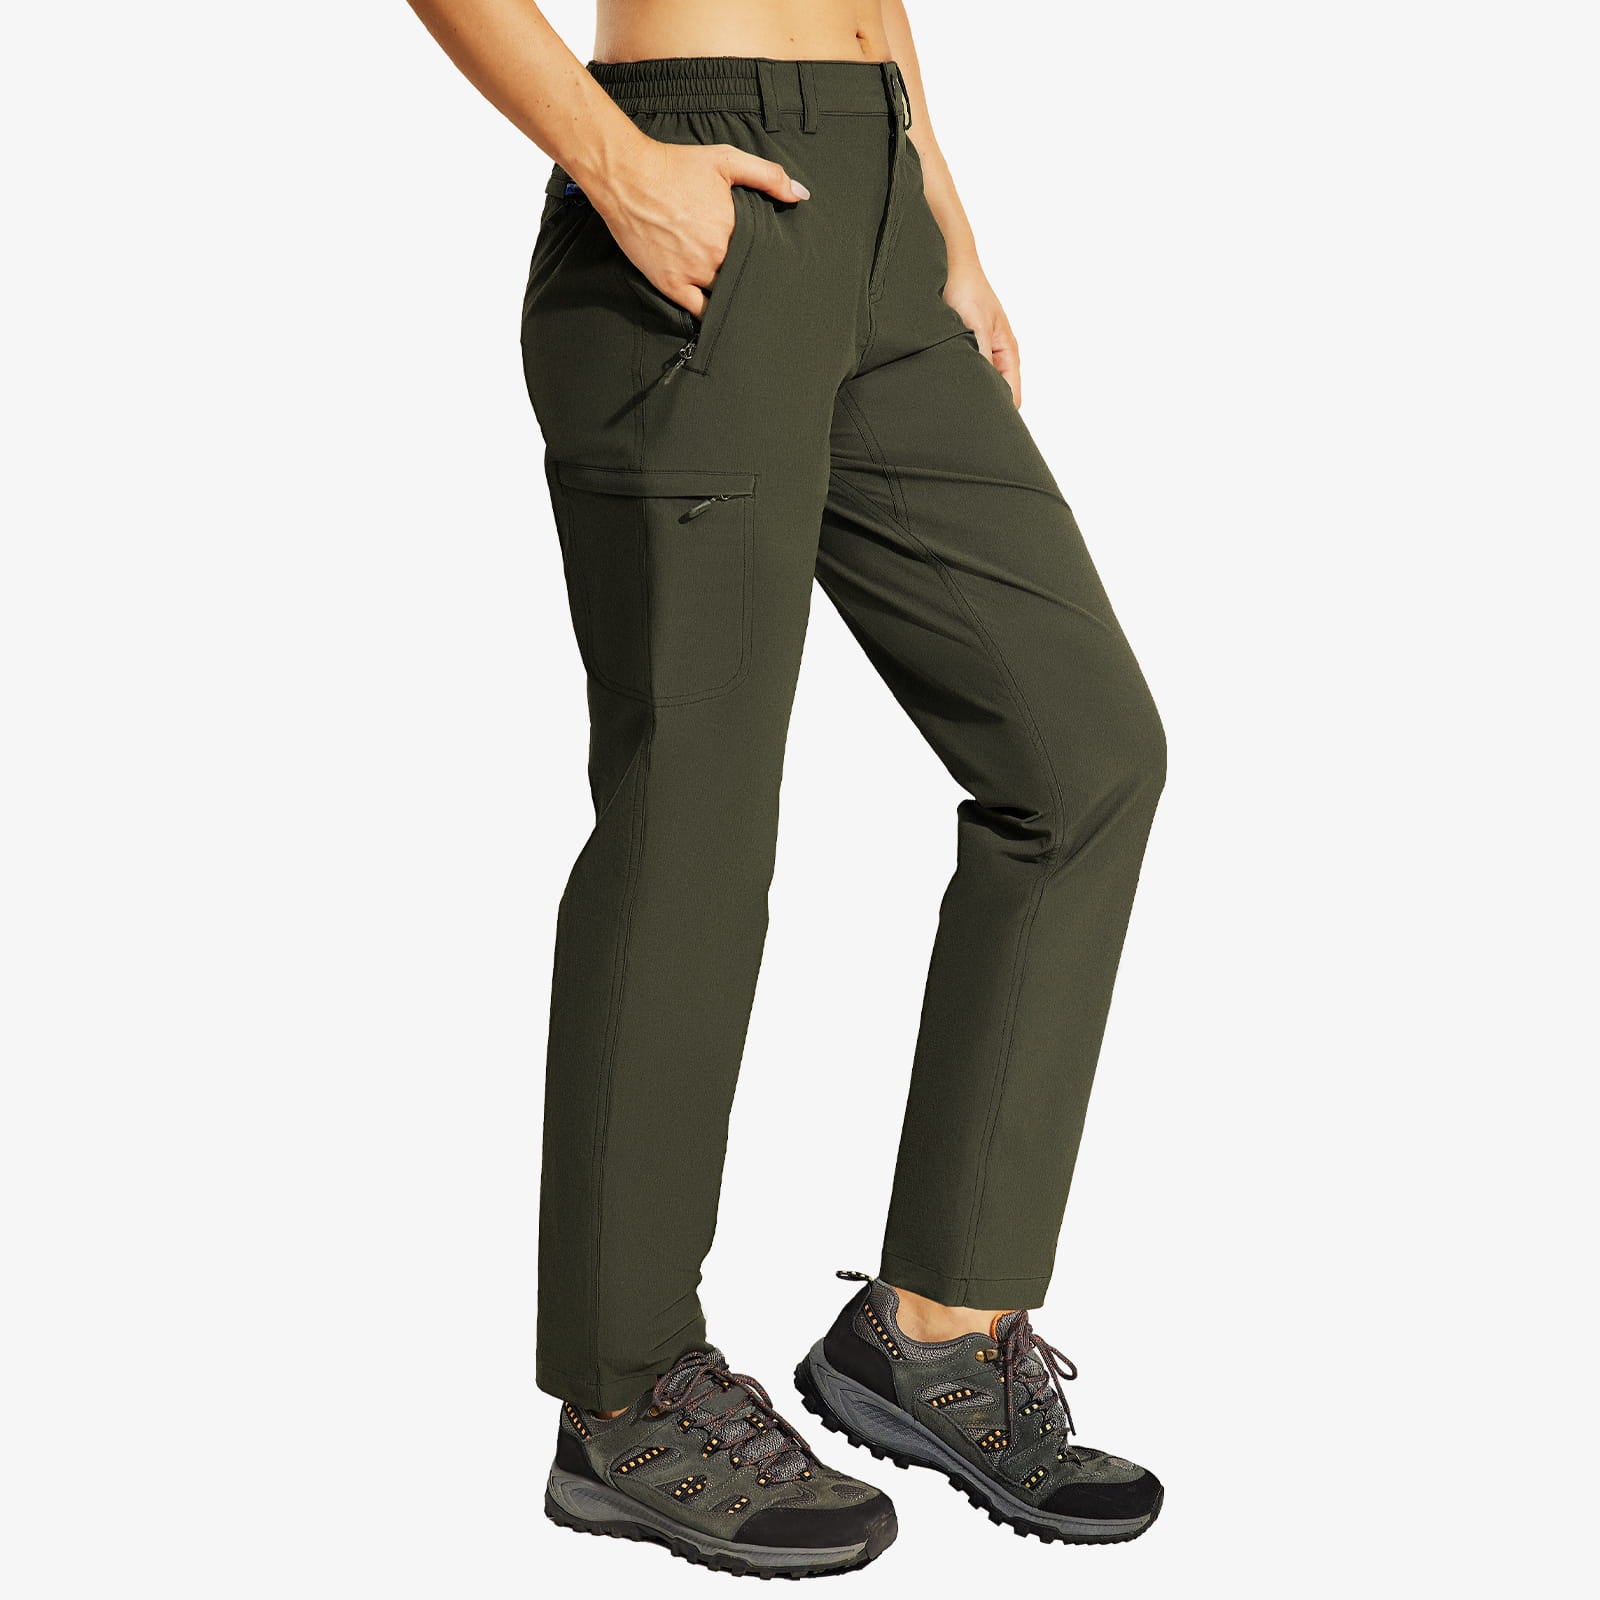 Women's Cargo Hiking Pants Joggers Lightweight Quick Dry Athletic Workout  Casual Pants with Zipper Pockets Black Medium